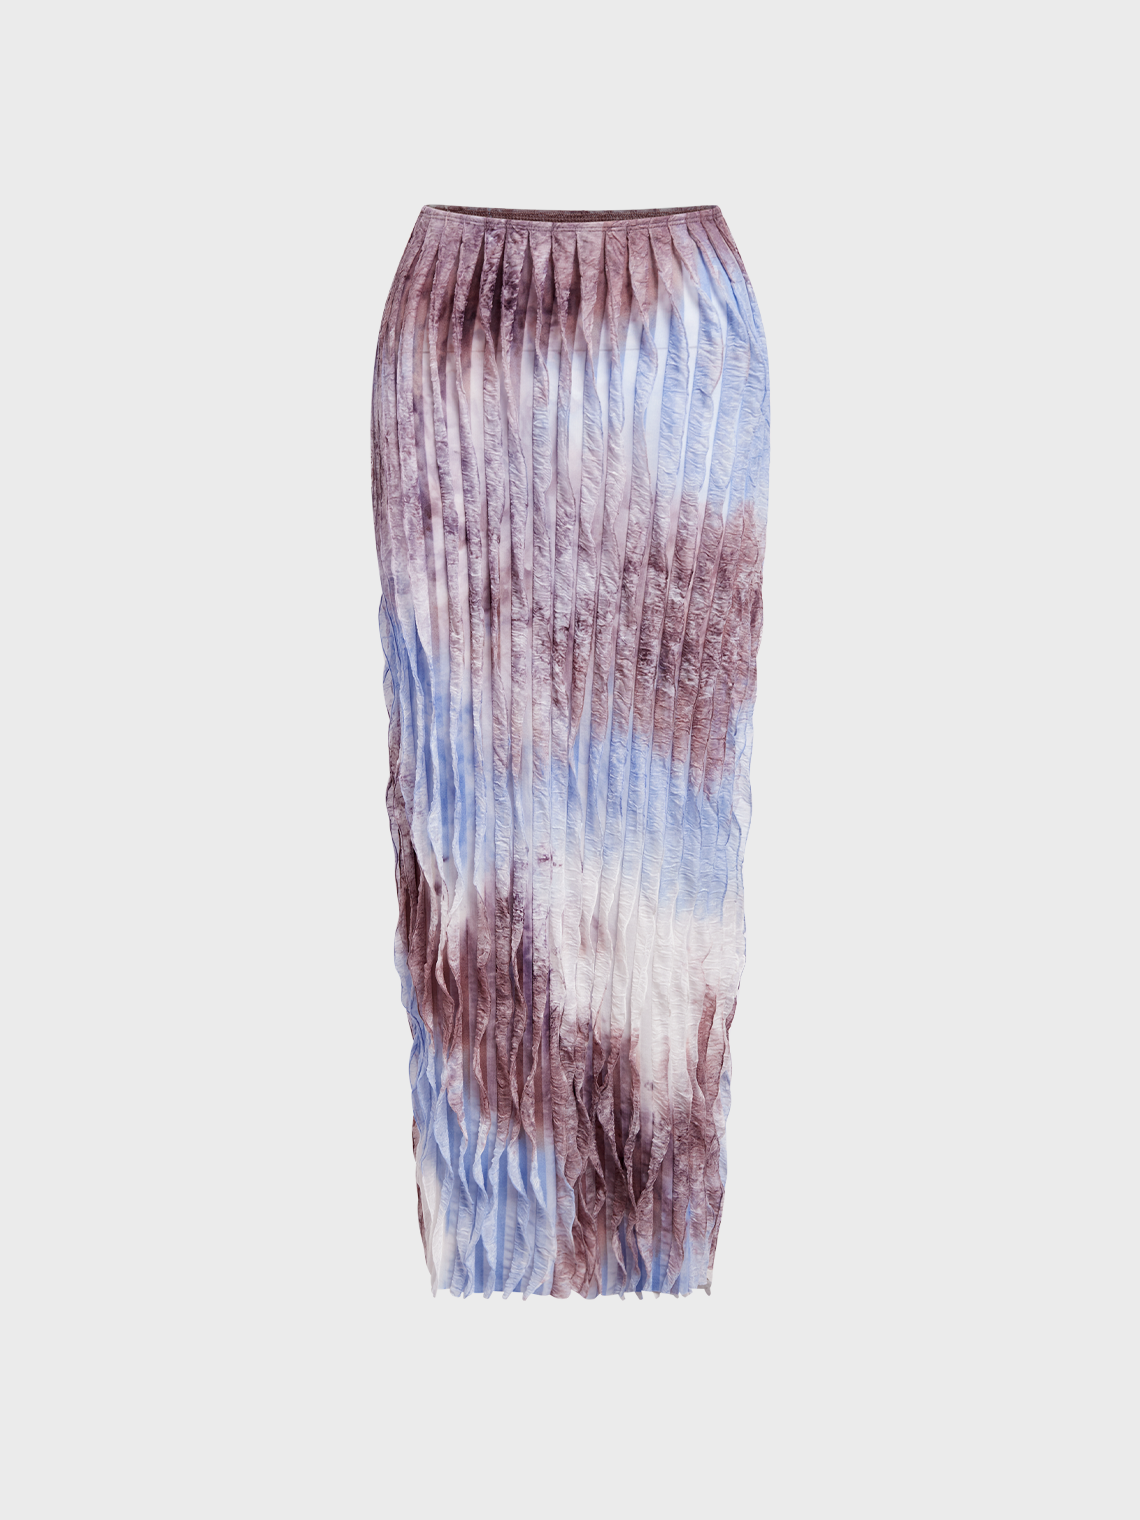 【Final Sale】Texture Fabric Tie Dye Top With Skirt Matching Set